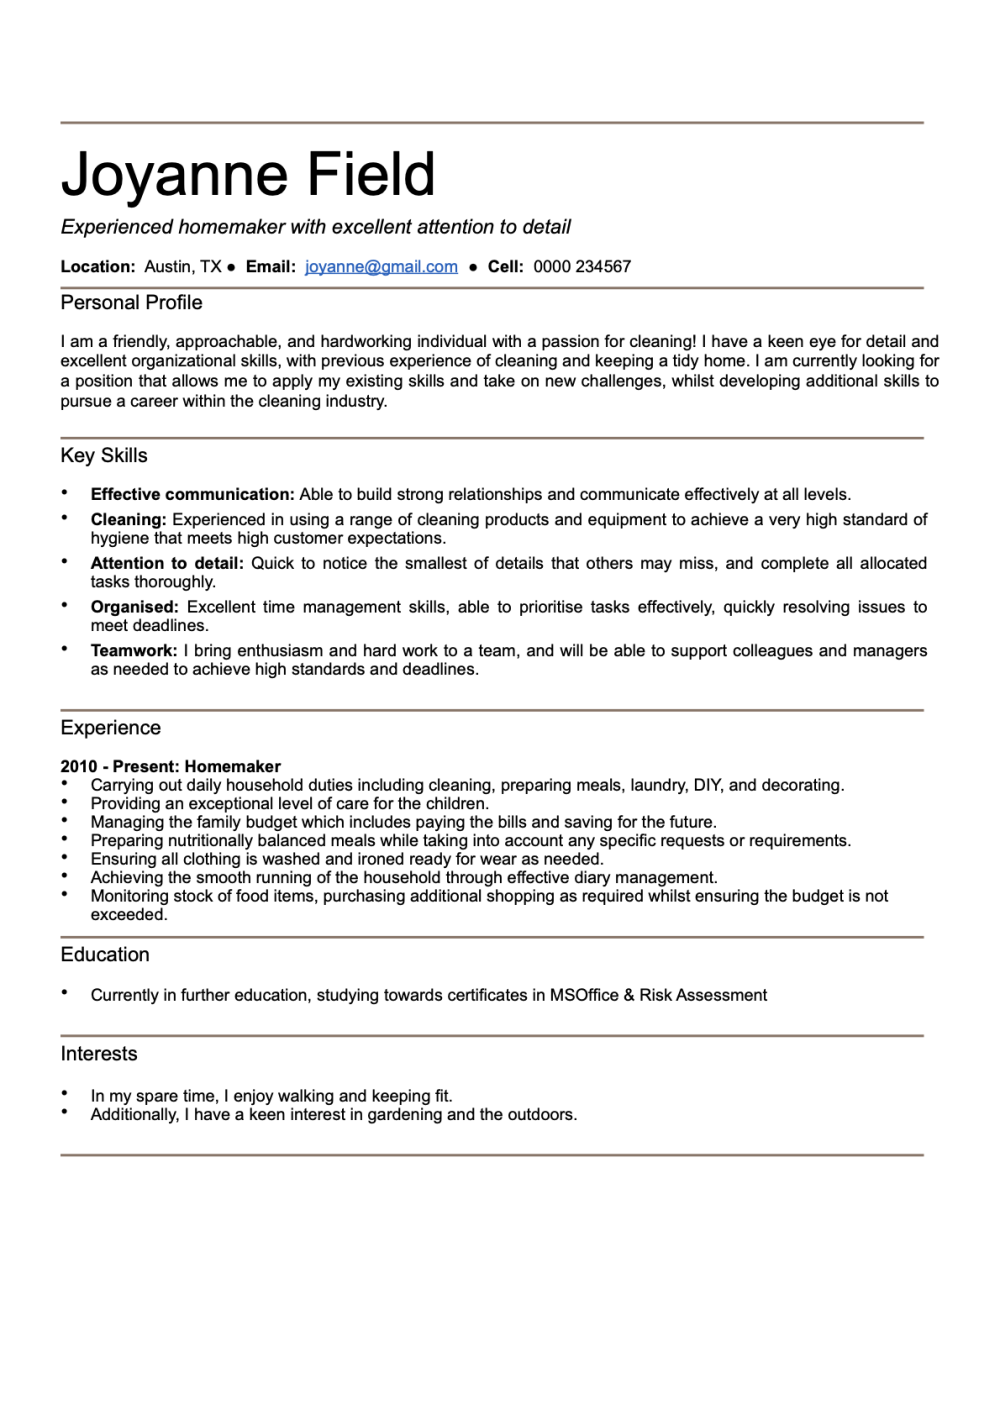 writing a resume with no experience